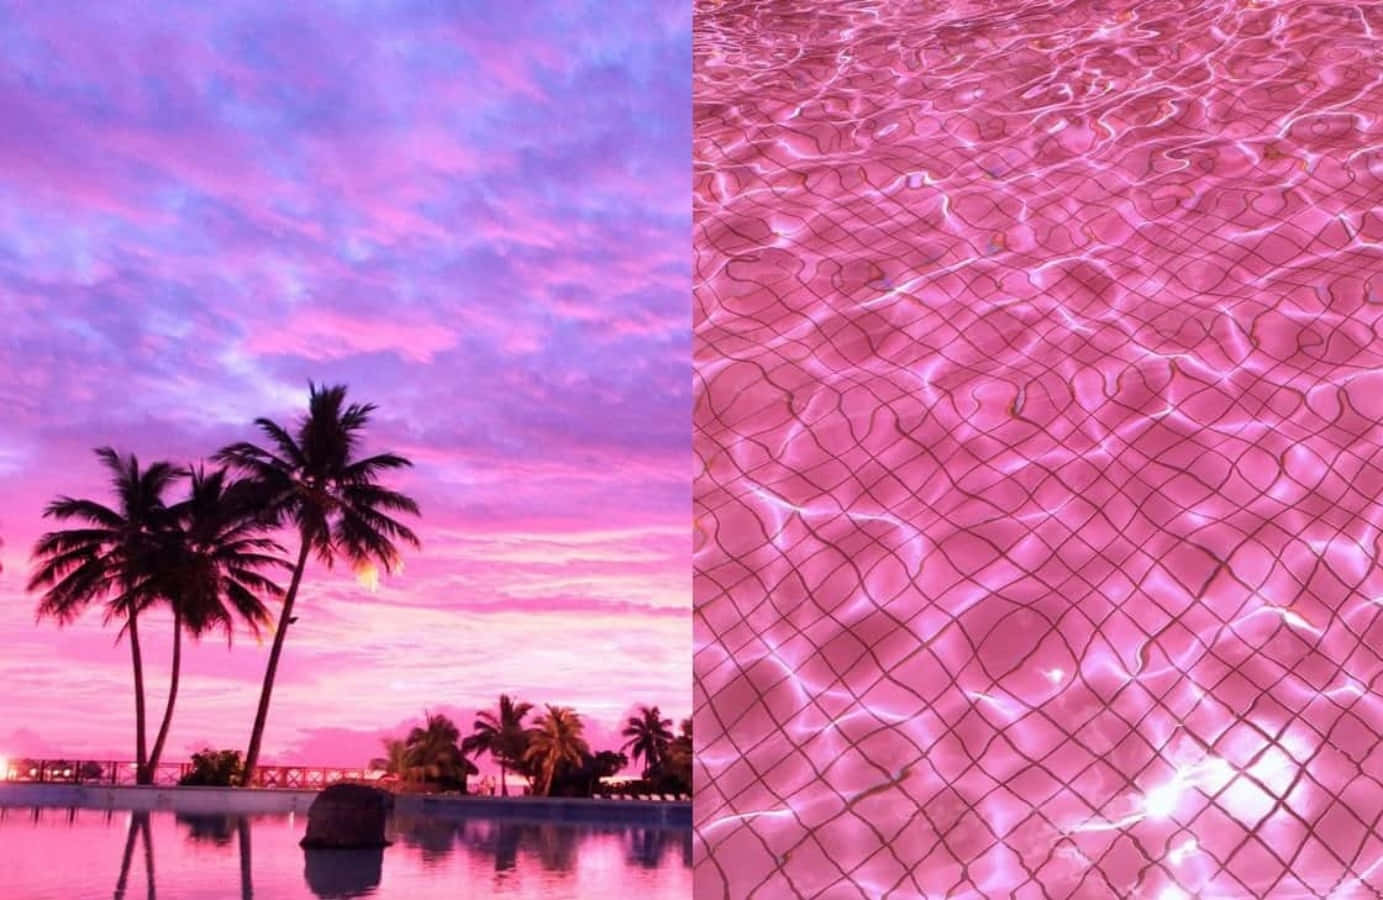 Aesthetic Pink Collage 1383 X 900 Wallpaper